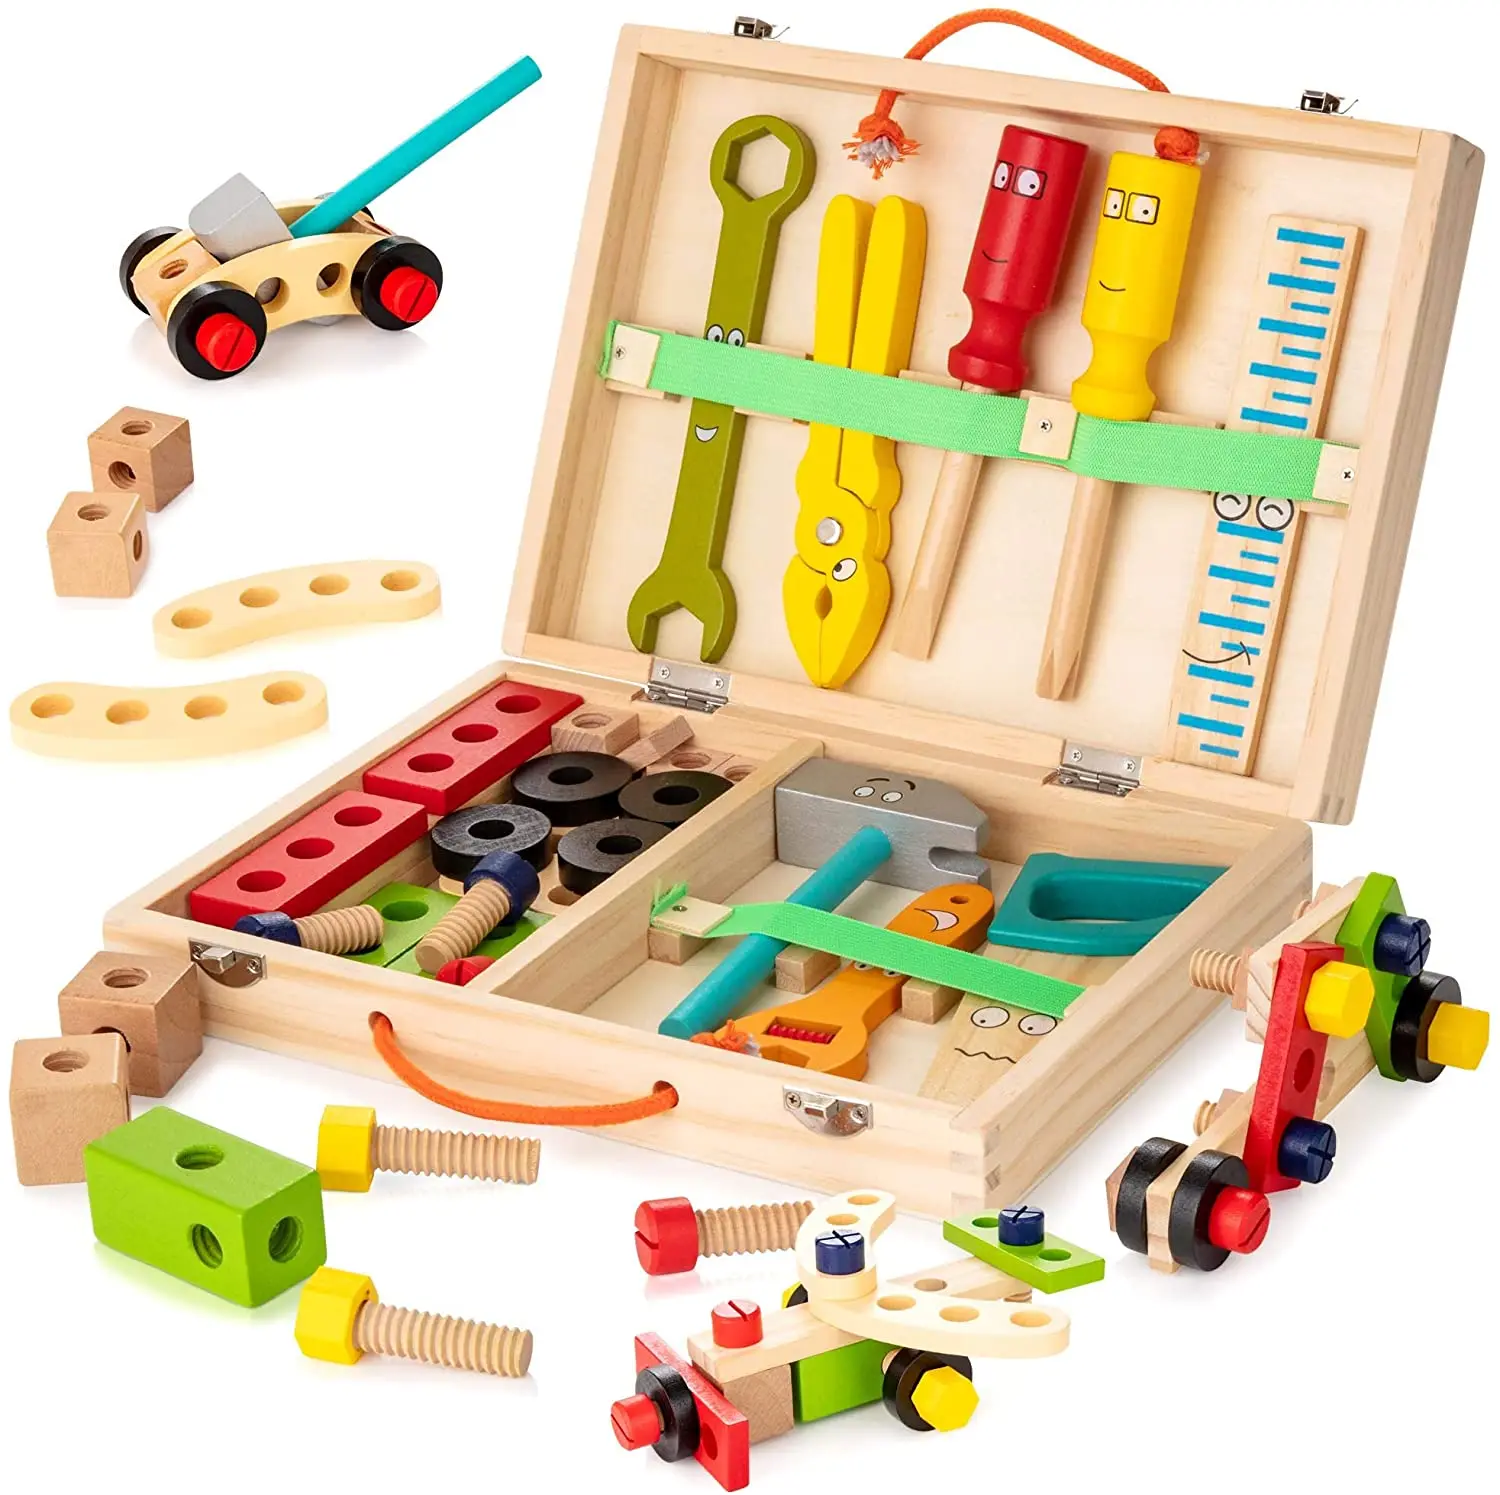 

wooden toys Tighten screws disassembly assembly and unloading combination toolbox for children boys and babies